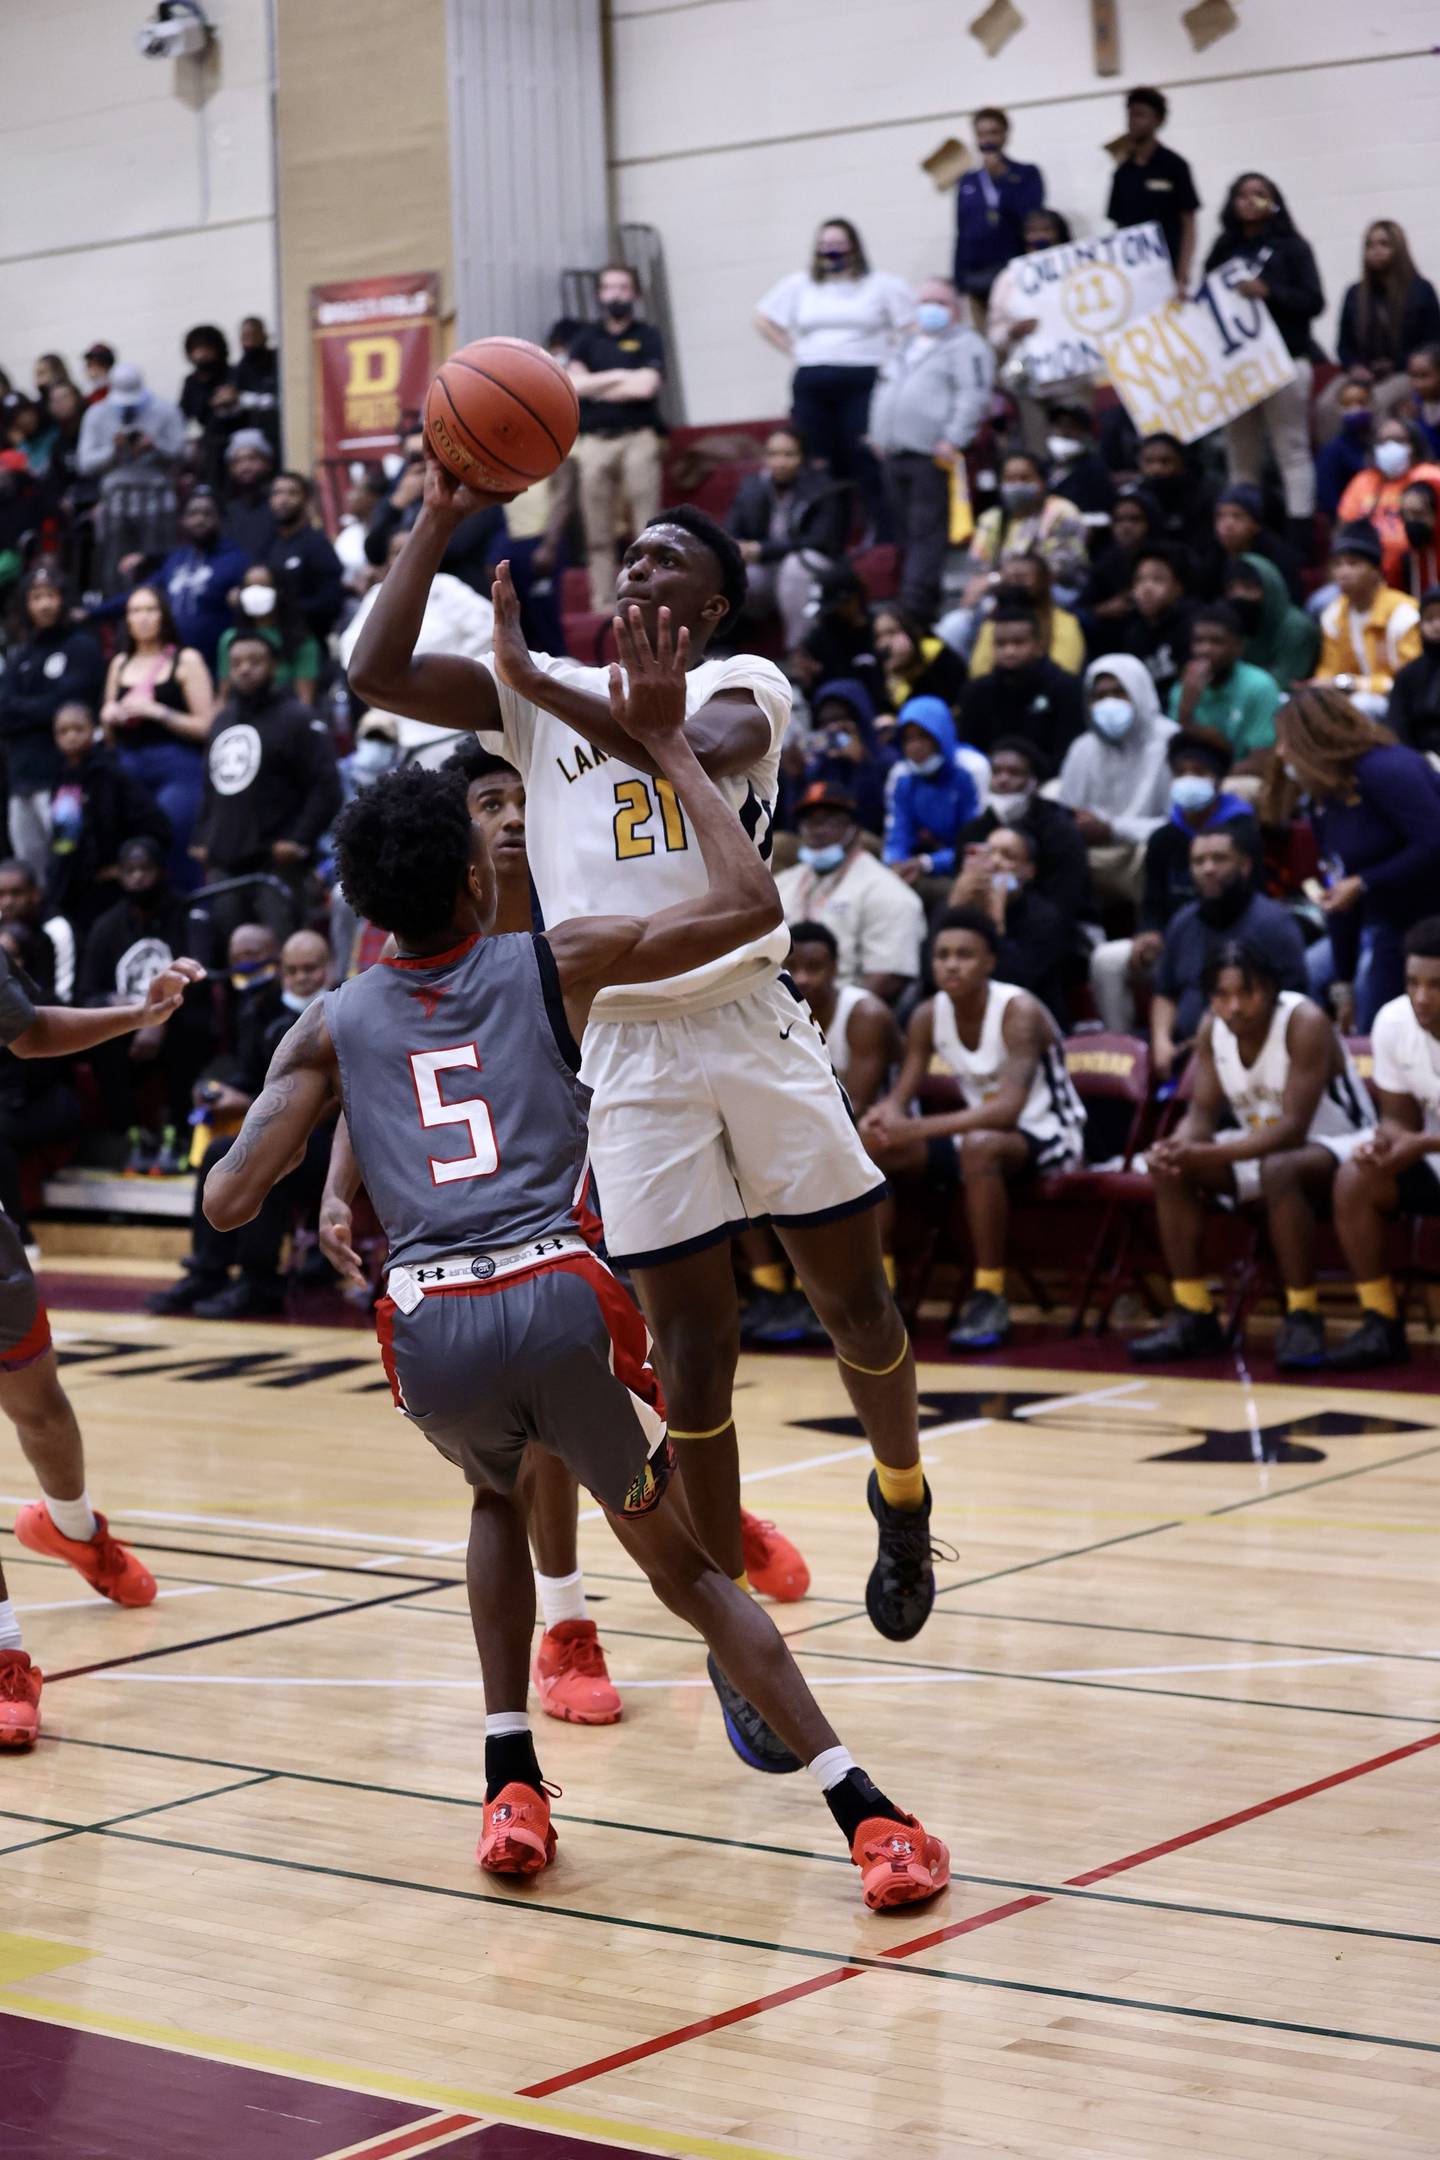 Quentin Moore, pulling up for a shot against Edmondson in last season's Baltimore City title game, led Lake Clifton to three victories over the Red Storm. The rivals meet next week in East Baltimore.